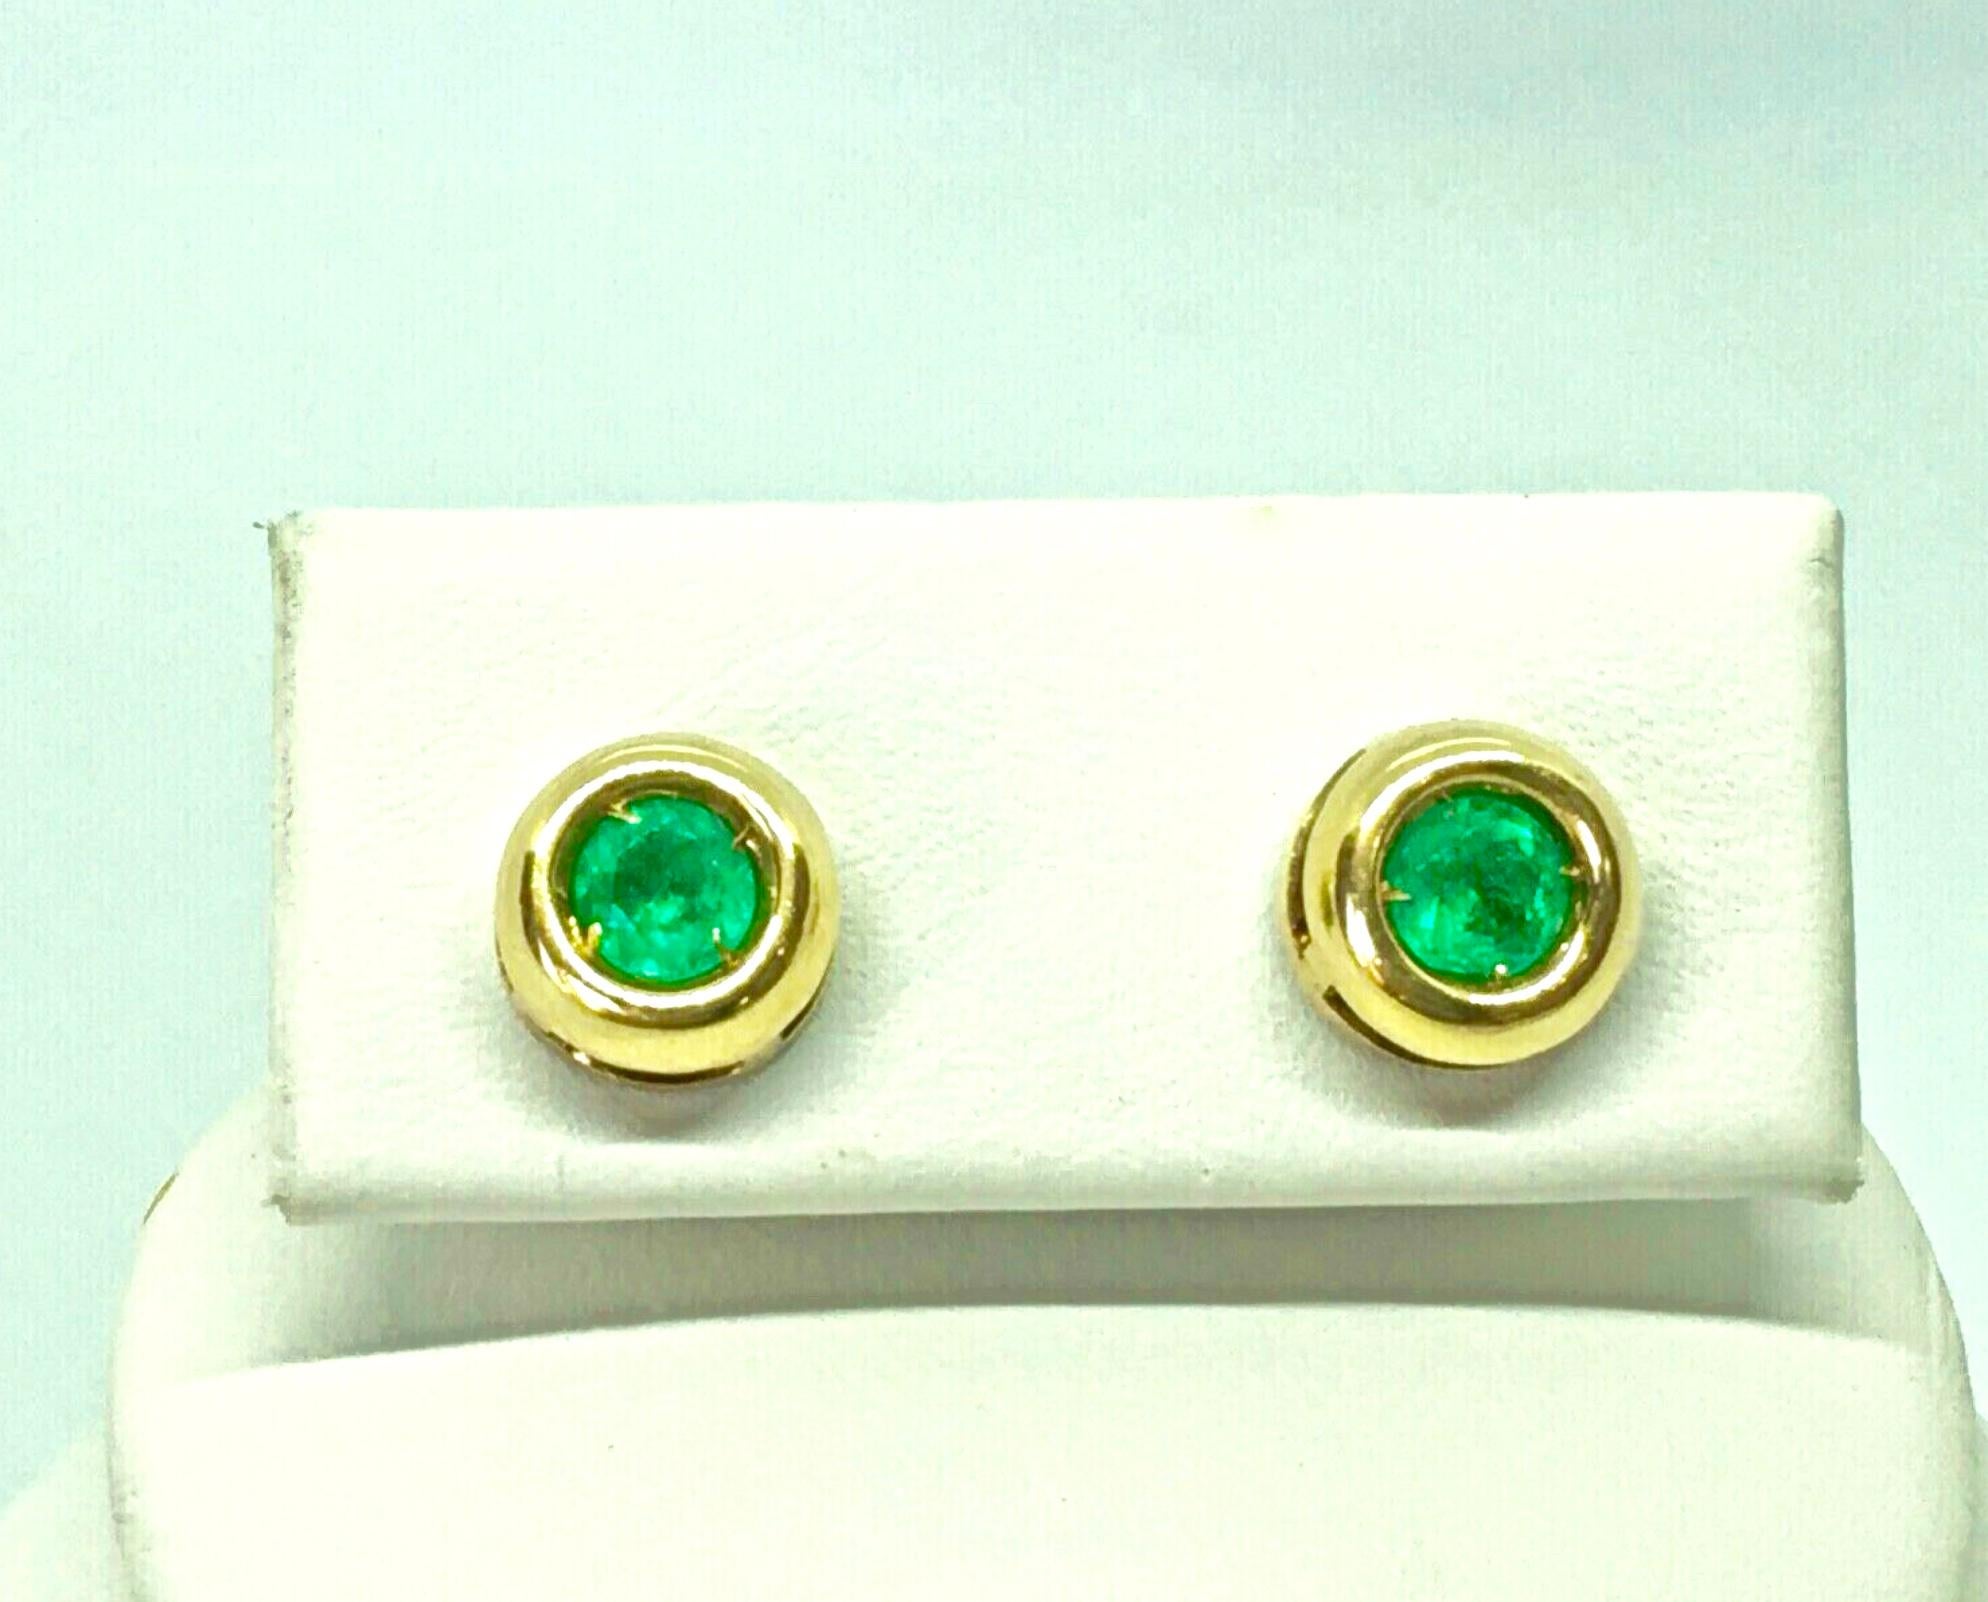 Chic Stud Emerald Earrings 
Natural Medium Green Round Cut Colombian Emeralds
Total Weight 1.00 carat
Made of Solid 18K Yellow Gold 2.7g
Push Backs
Bezel Set